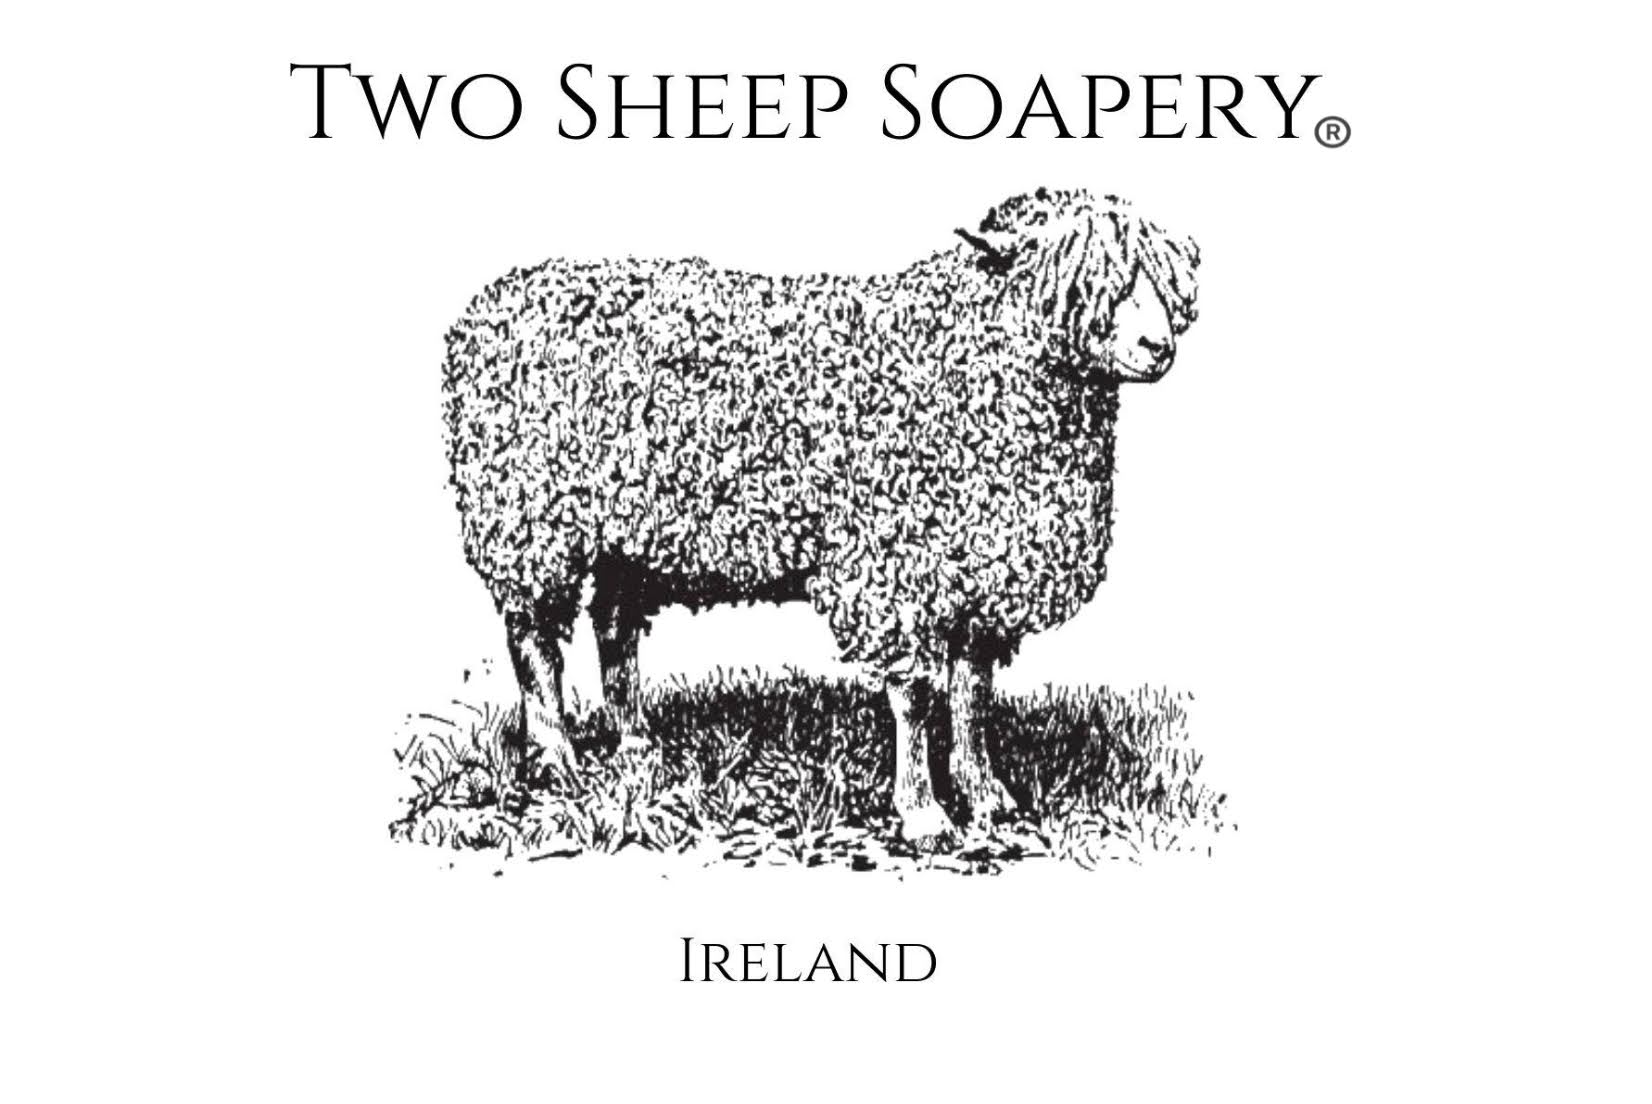 Two Sheep Soapery